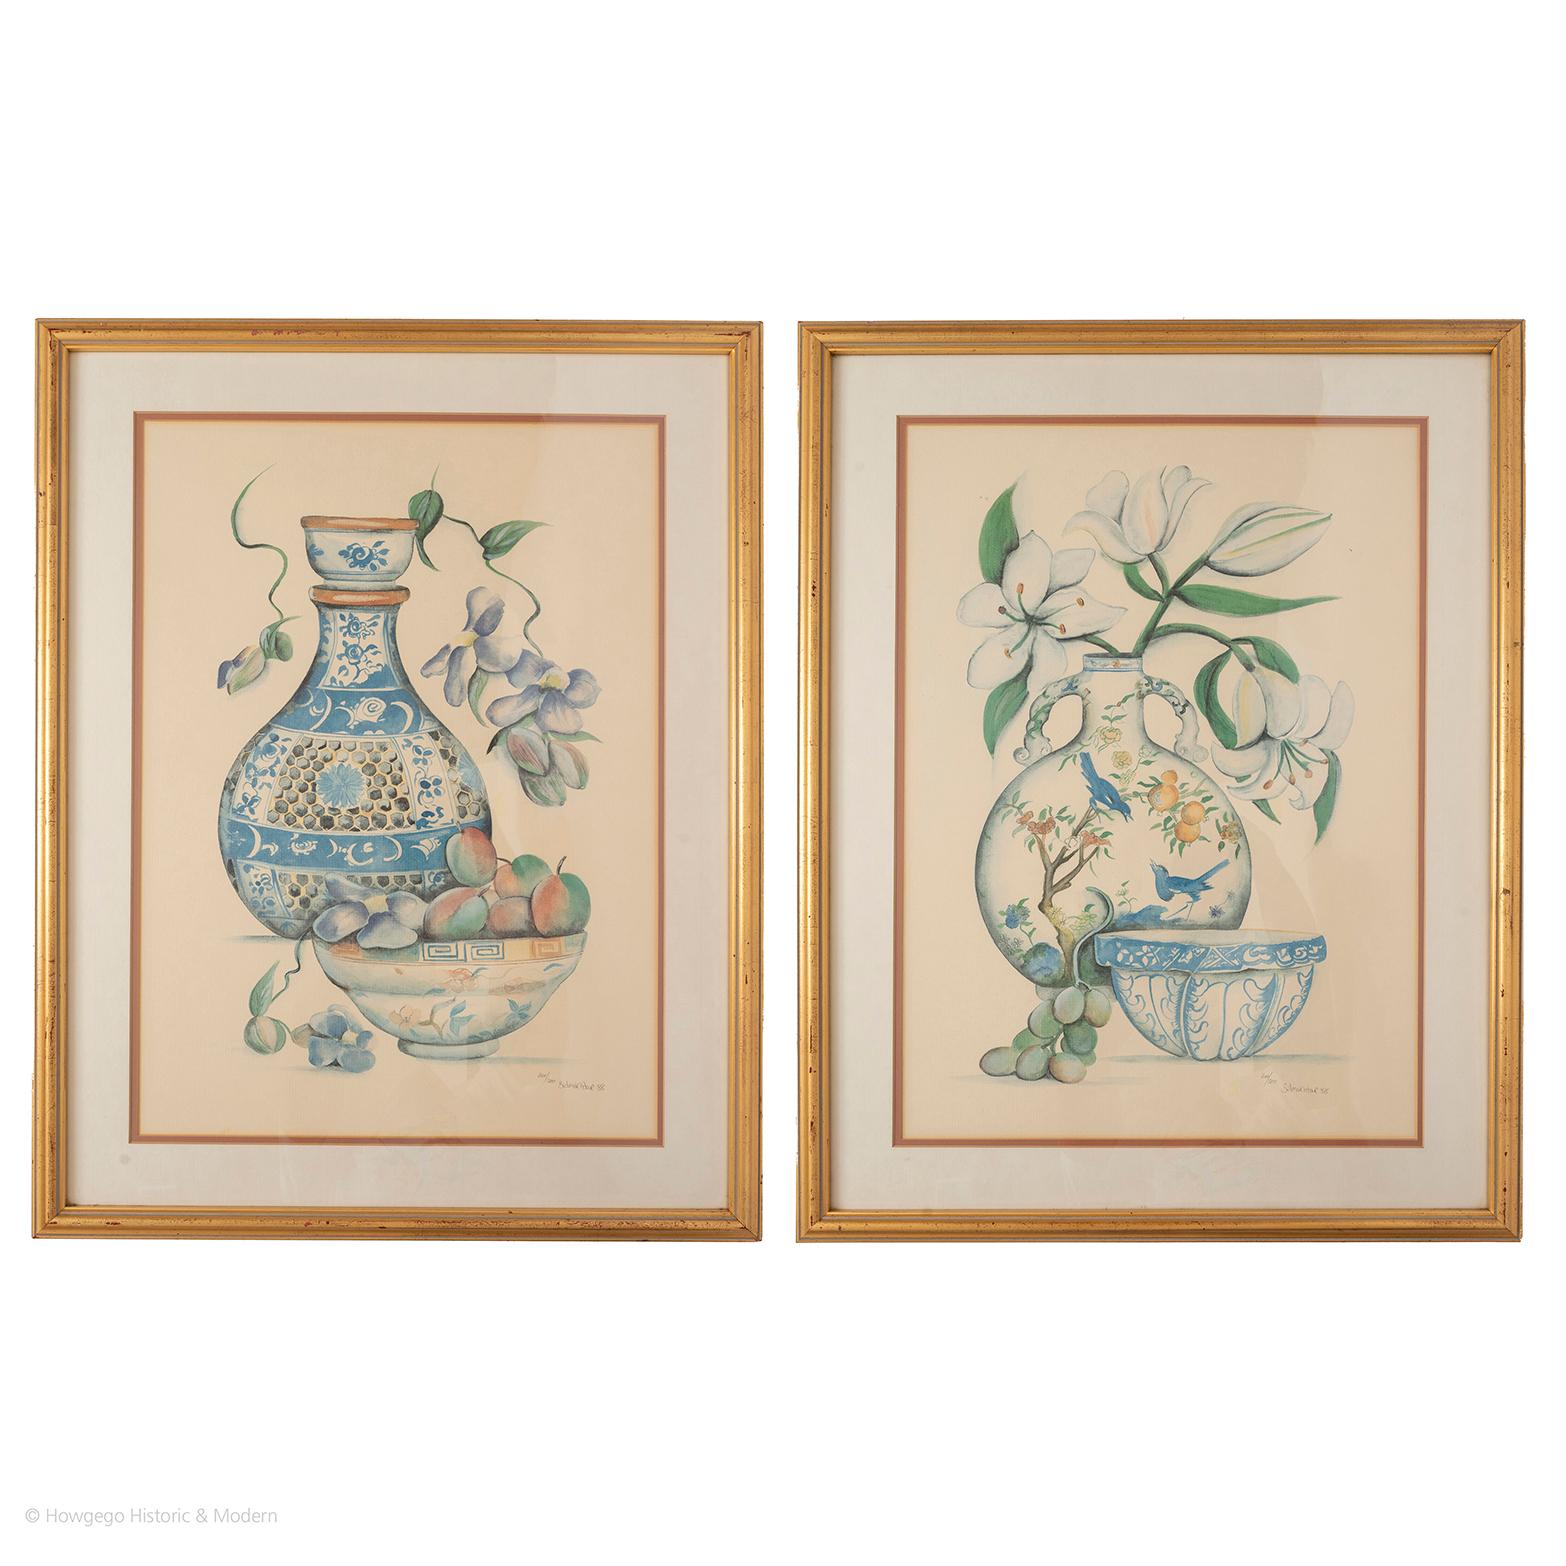 Mandy Belmokhtar 
Pair of prints depicting Chinese vases and bowls with fruit and flowers
Inscribed 200/500 & signed Belmokhtar 88
Visible sheet length 50cm., height 61cm.,
Length 57.5cm., 22 1/2